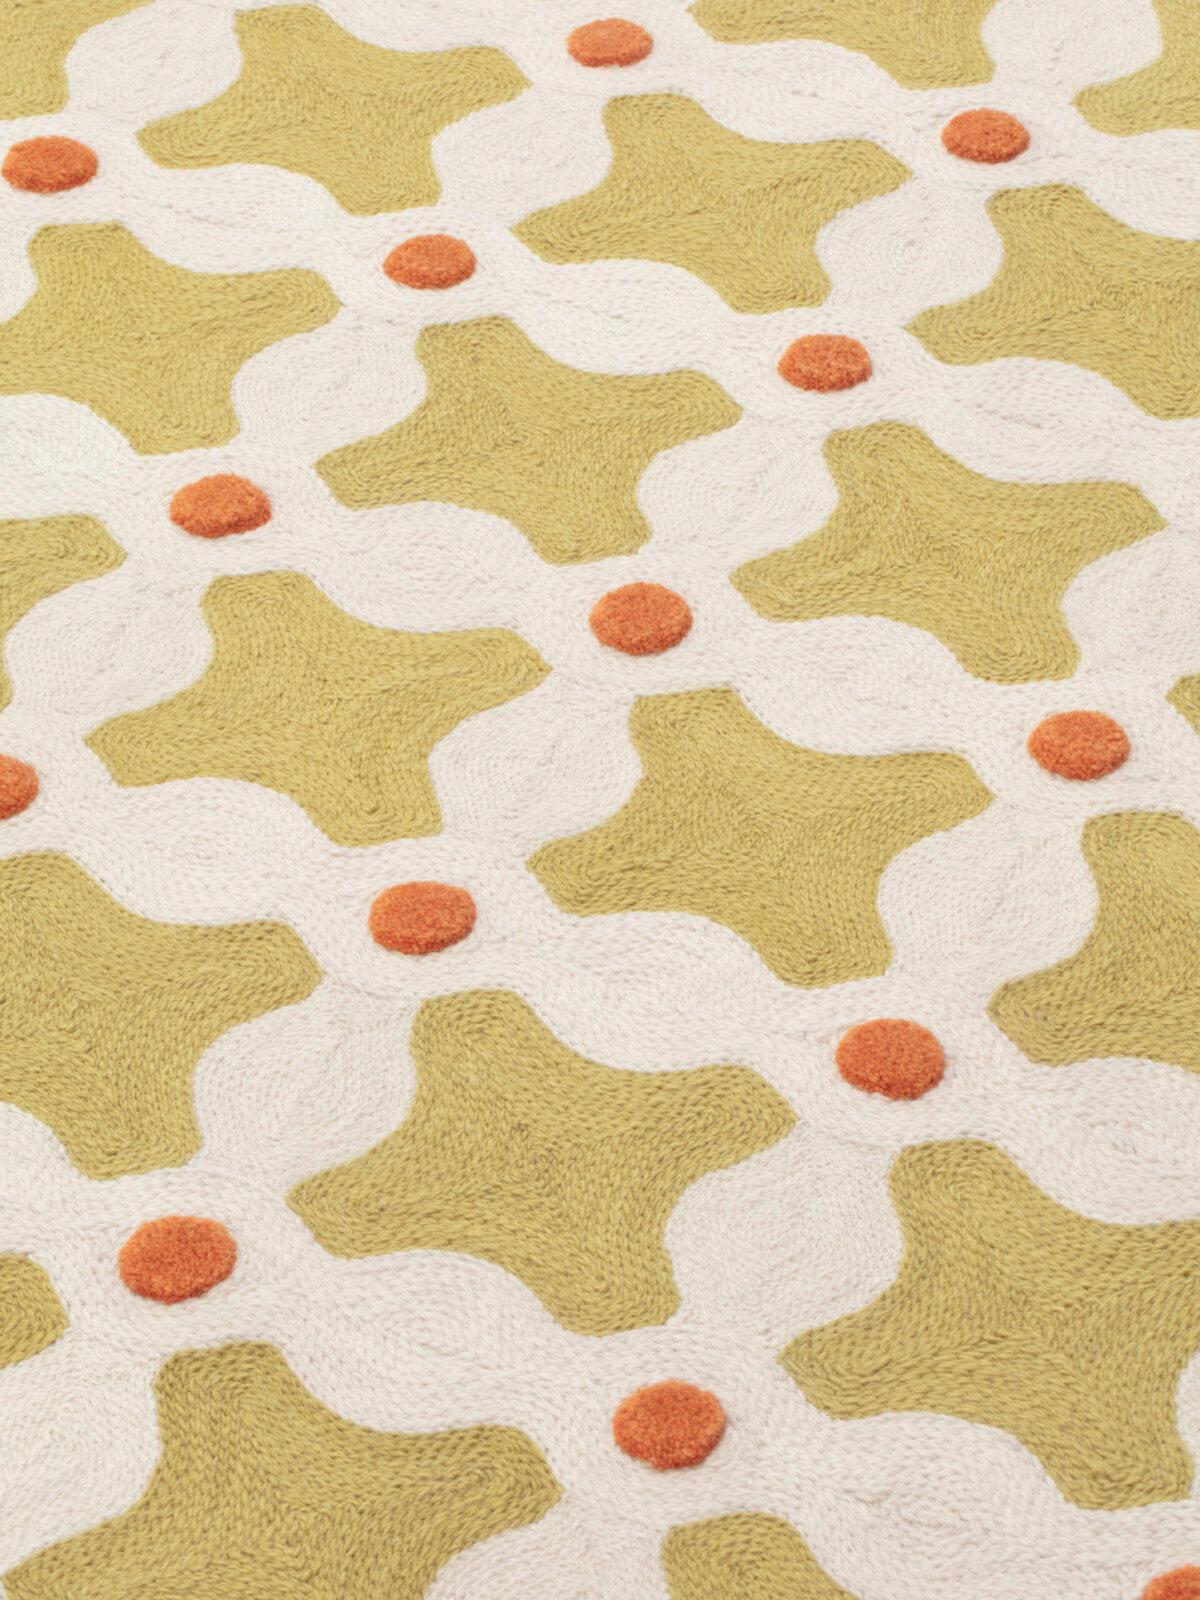 Crisscross is a collection of rugs designed by designer India Mahdavi for the CC-Tapis brand. These rugs are expertly crafted using fine hand-woven wool combined with the artisanal chain-stitch technique, which gives them an intricate weave and